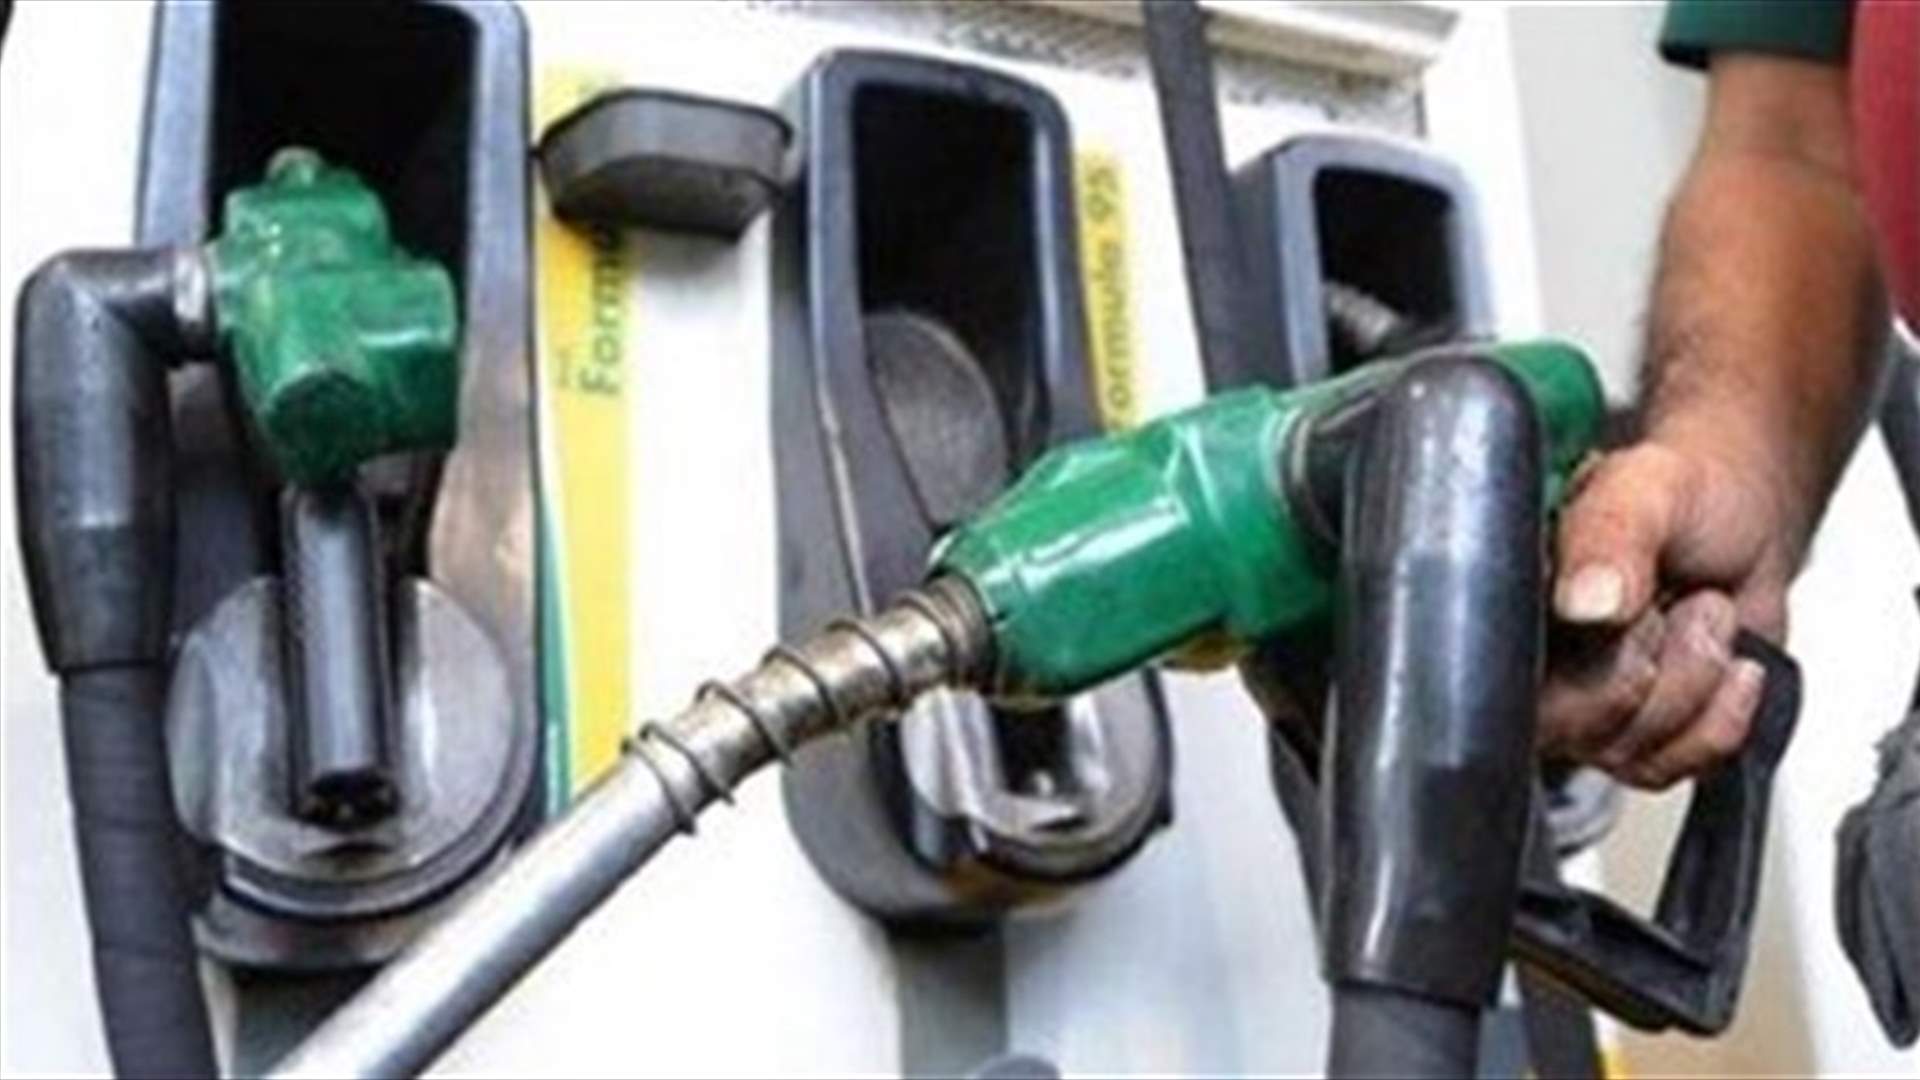 Price of gasoline witnesses changes